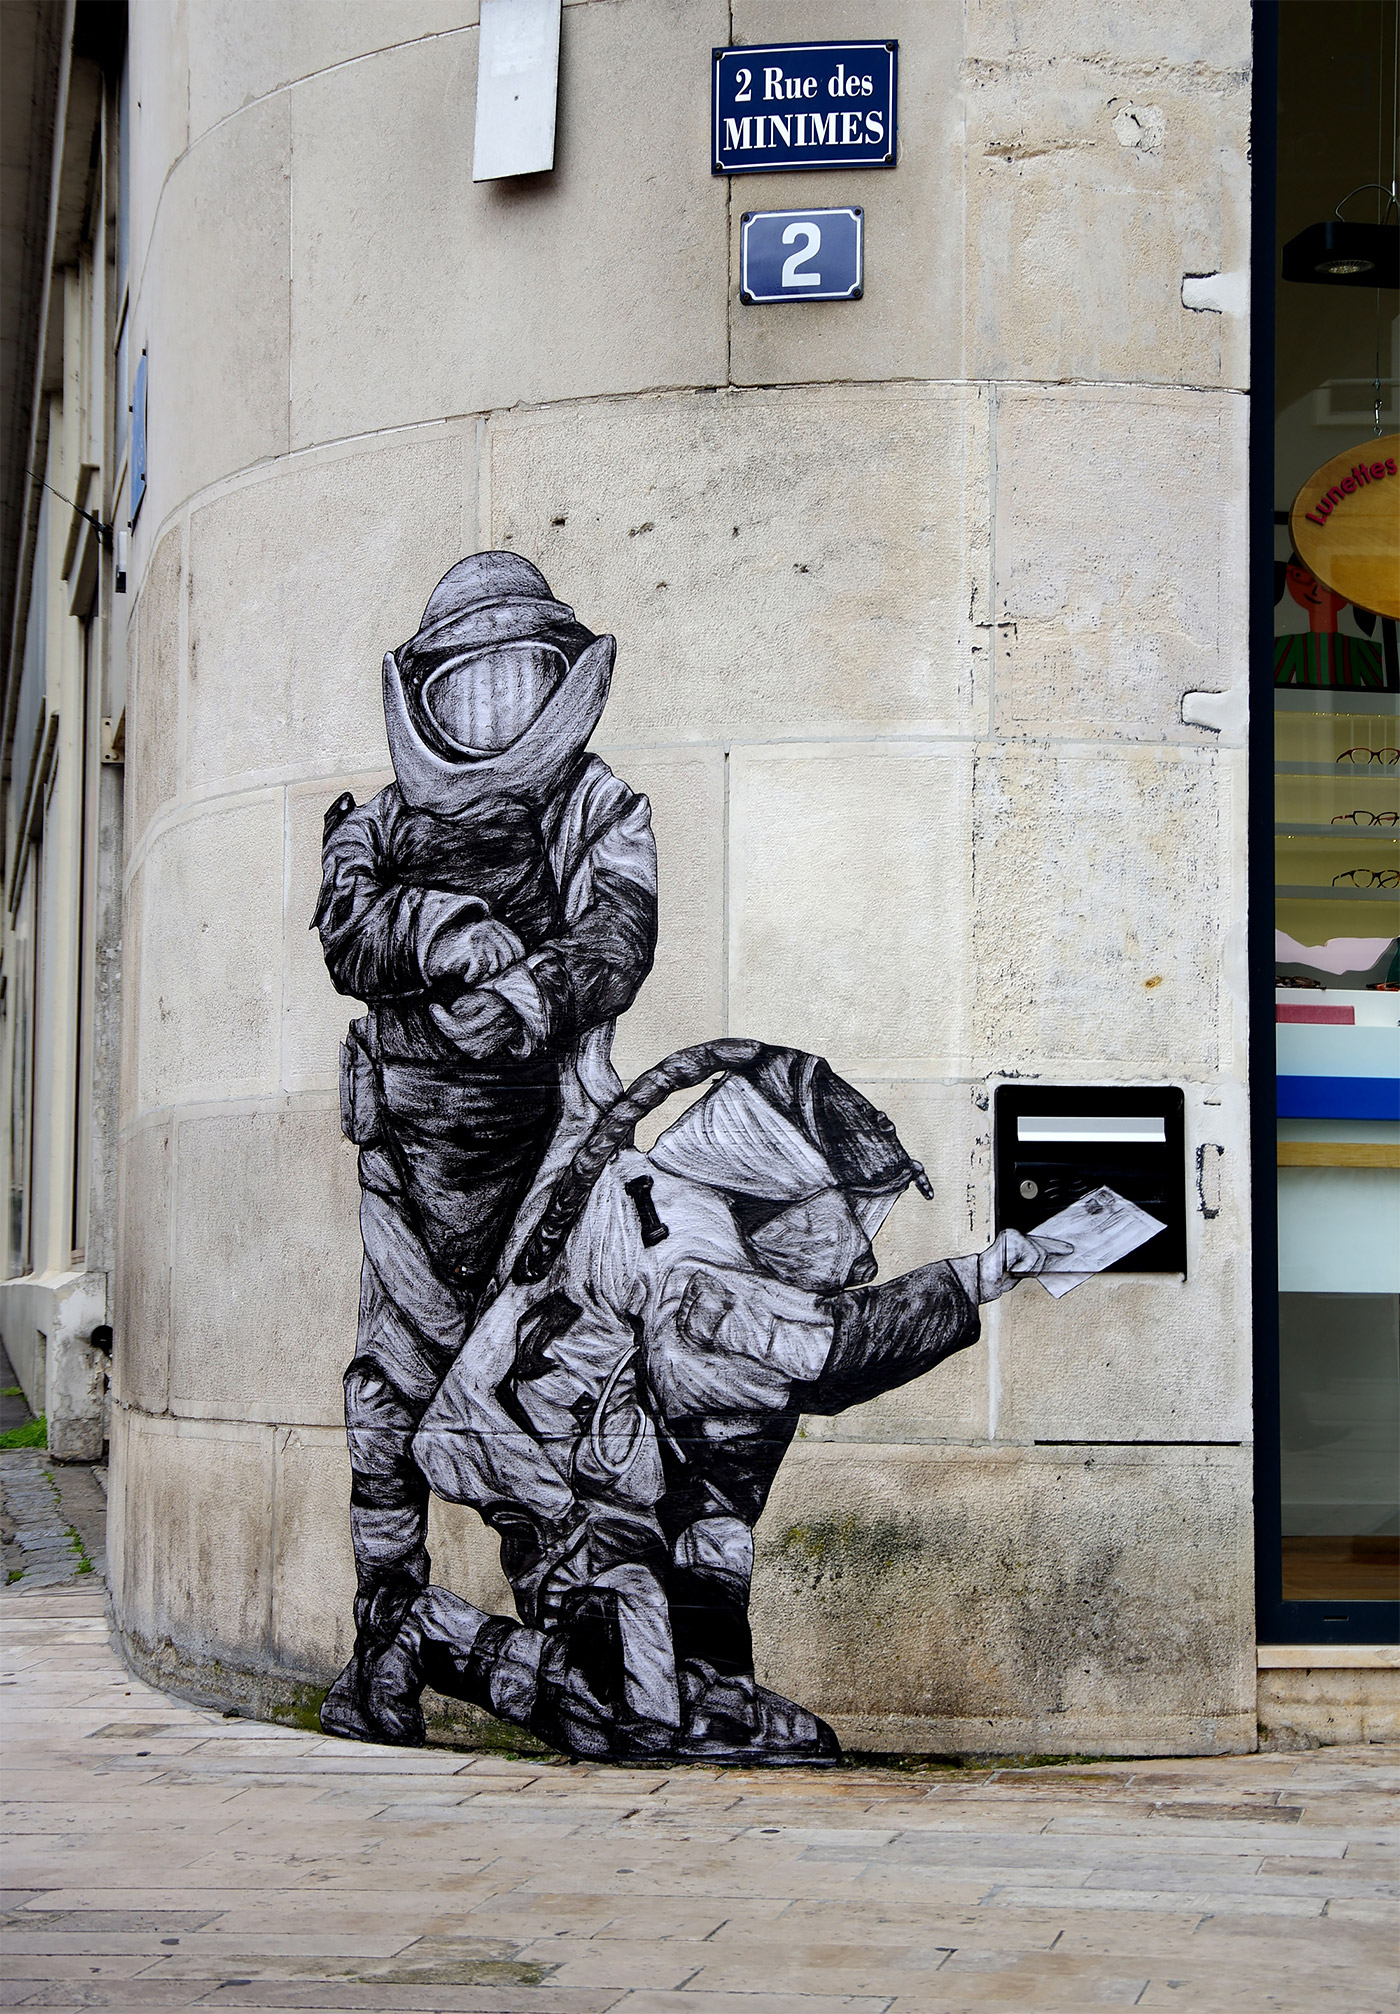 Urban Interventions: Street Art by Levalet | Daily design inspiration